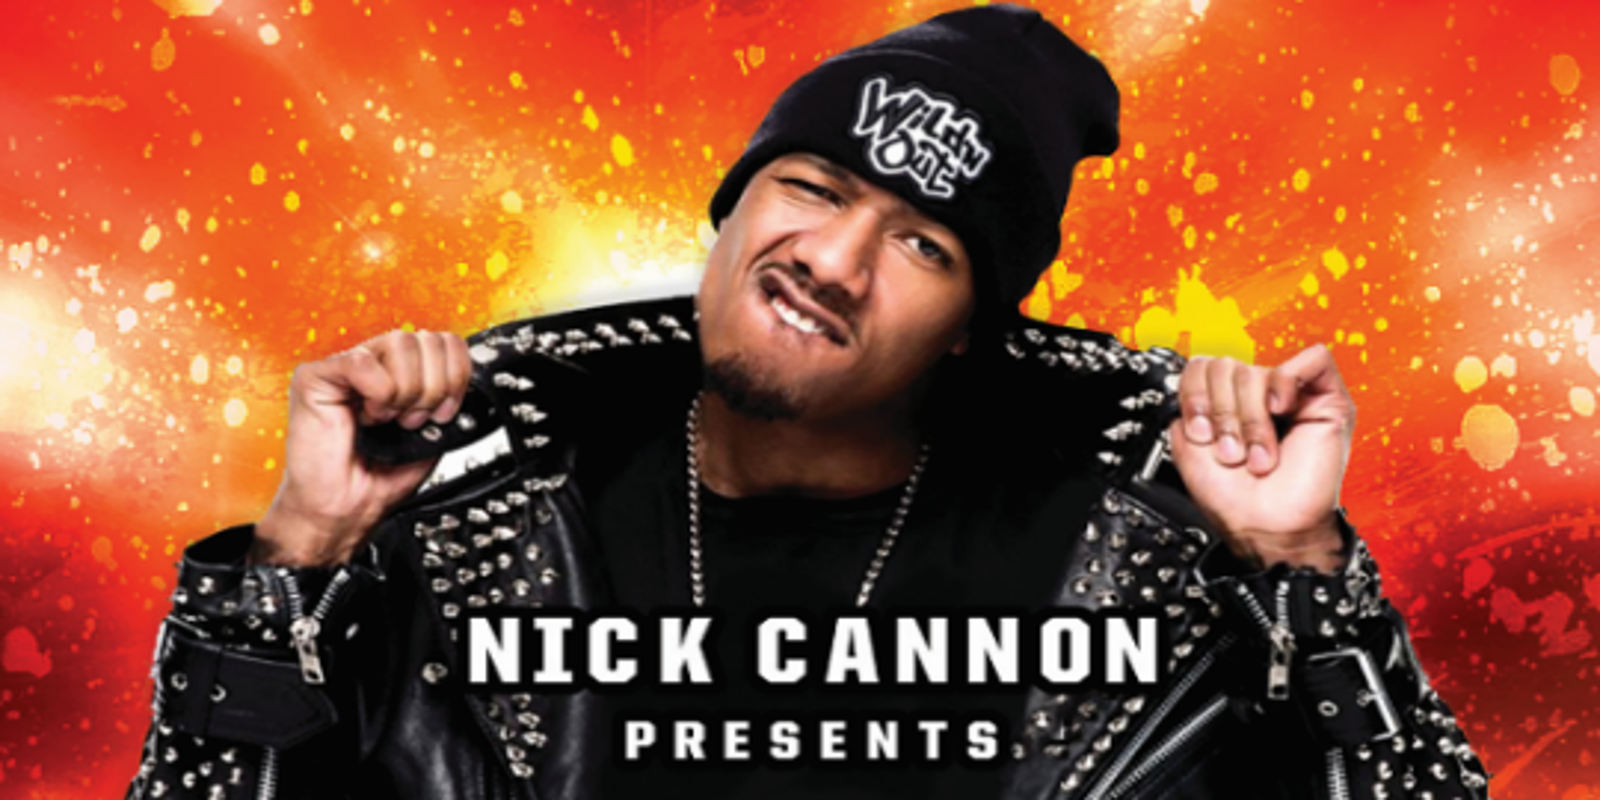 Nick Cannon Presents MTV Wild 'N Out Live tour coming to Detroit